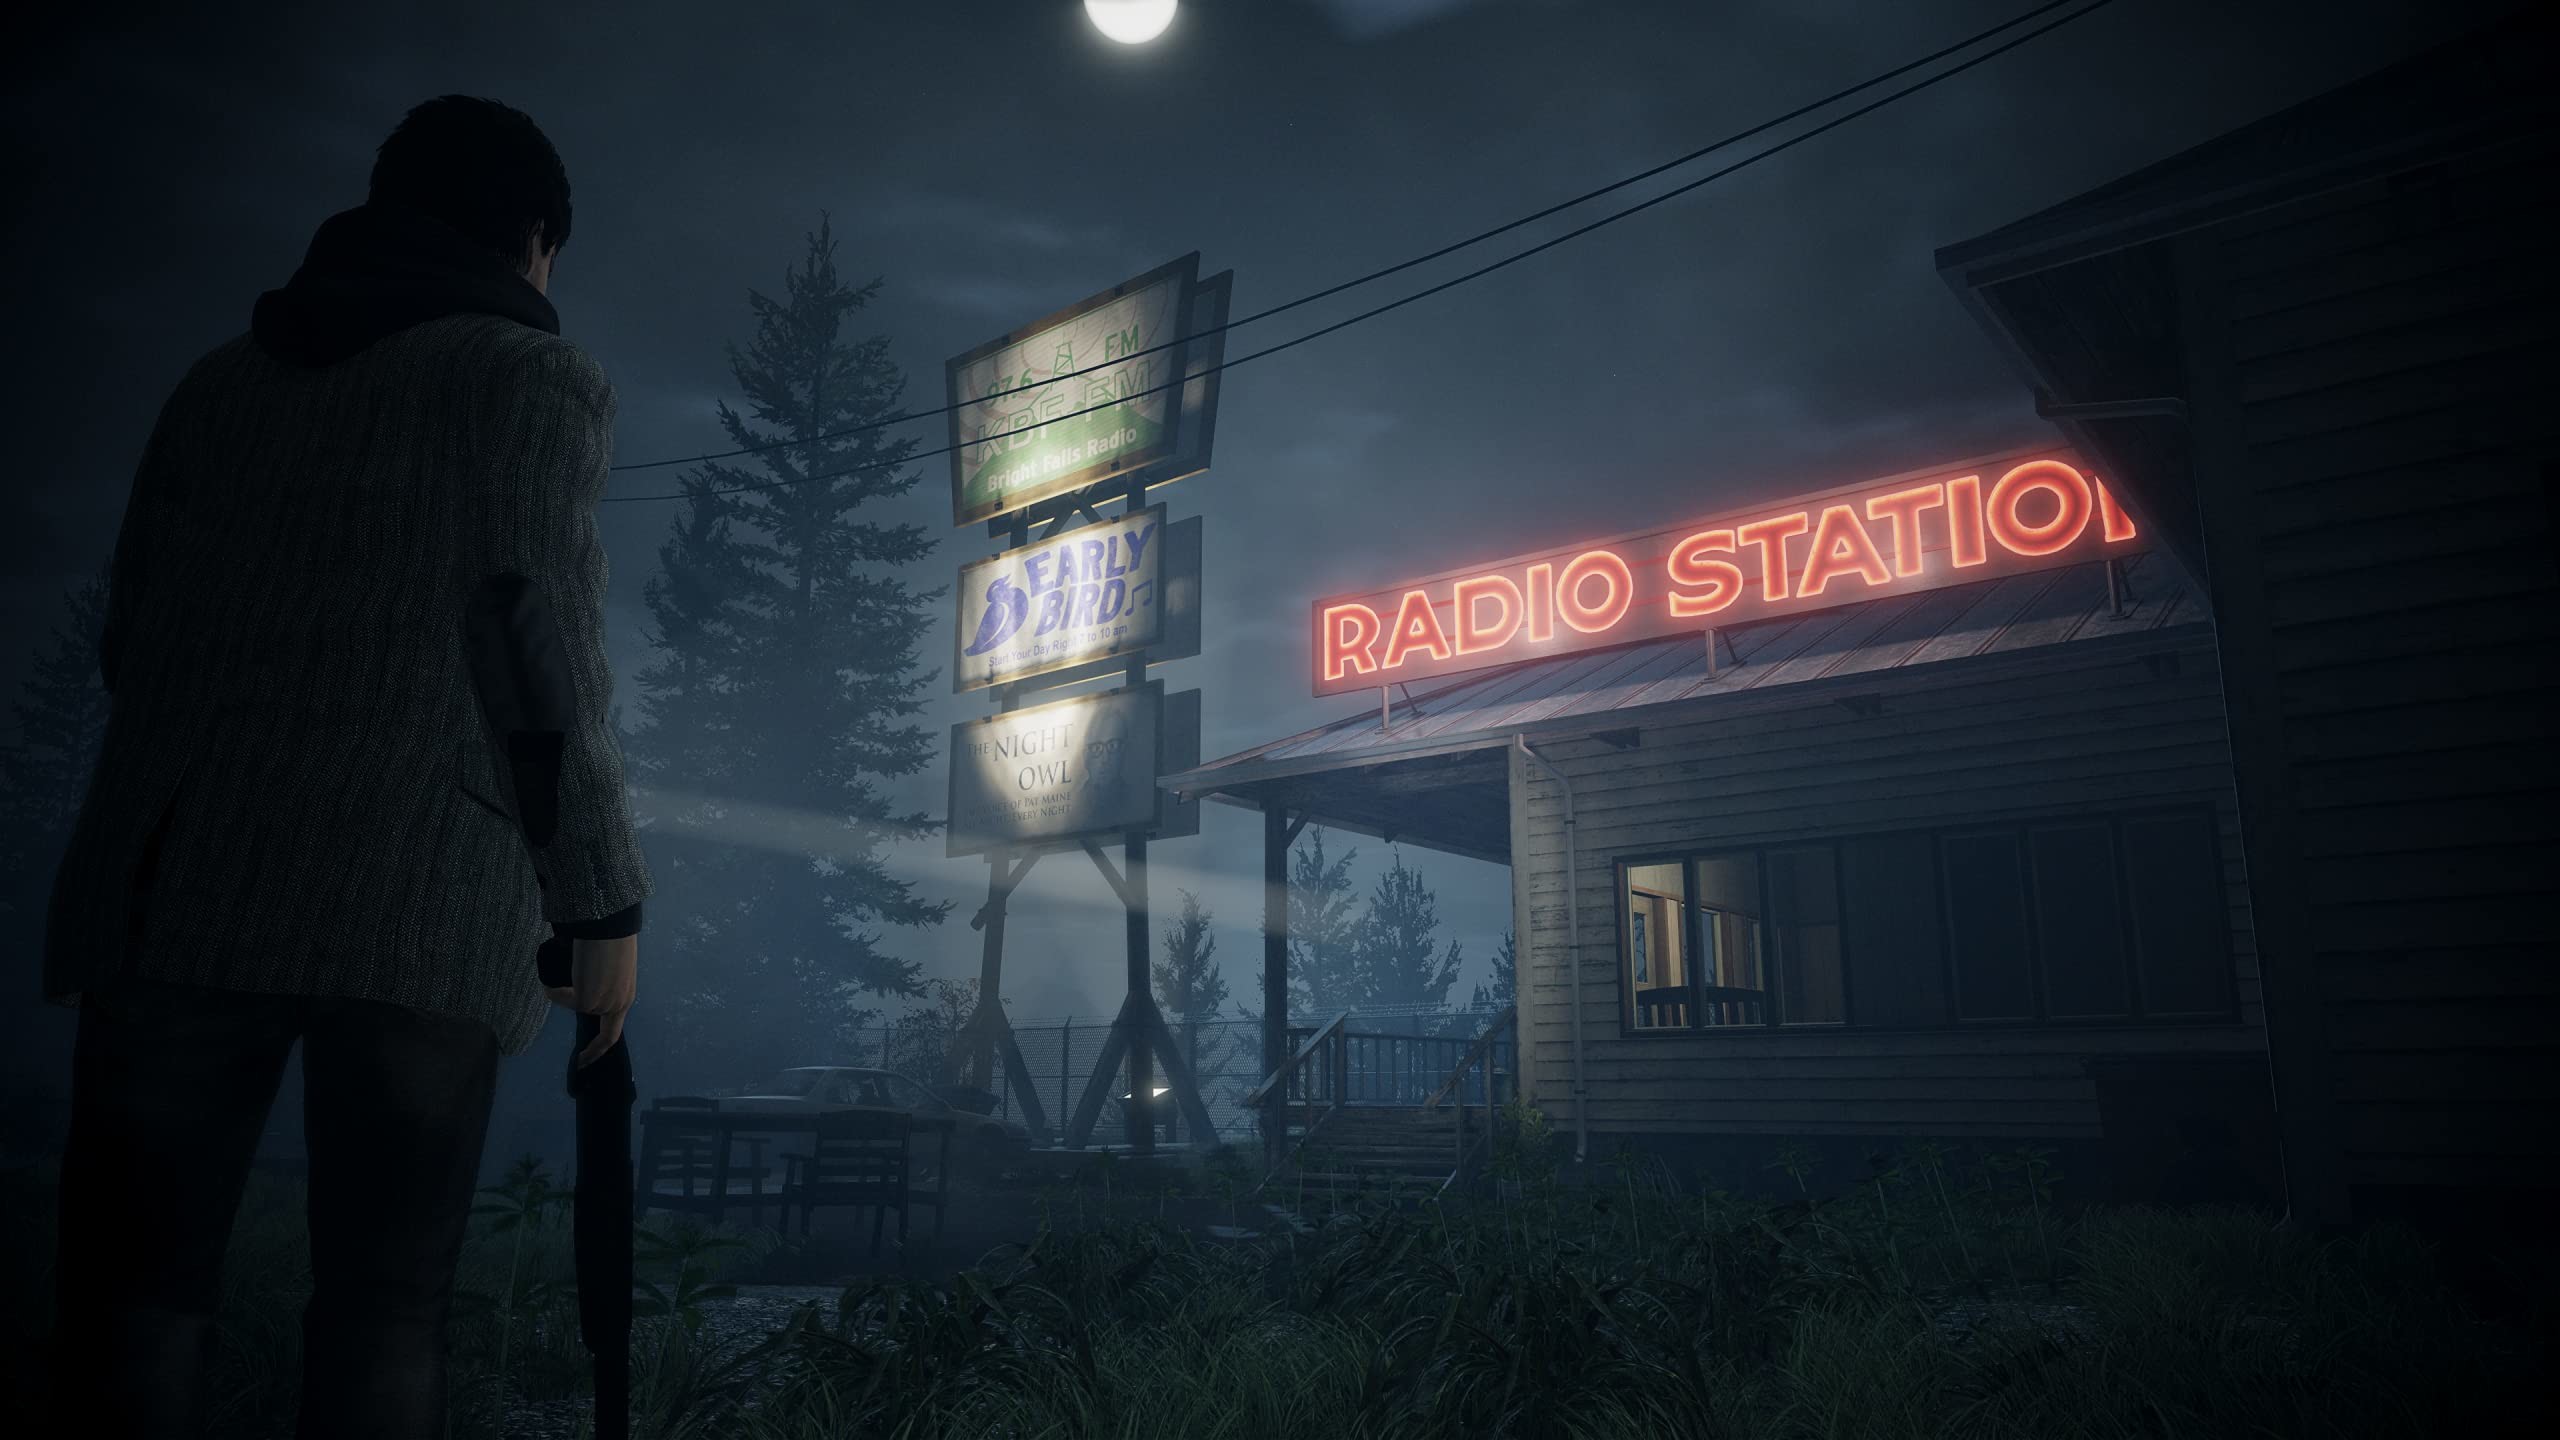 will alan wake remastered be on game pass